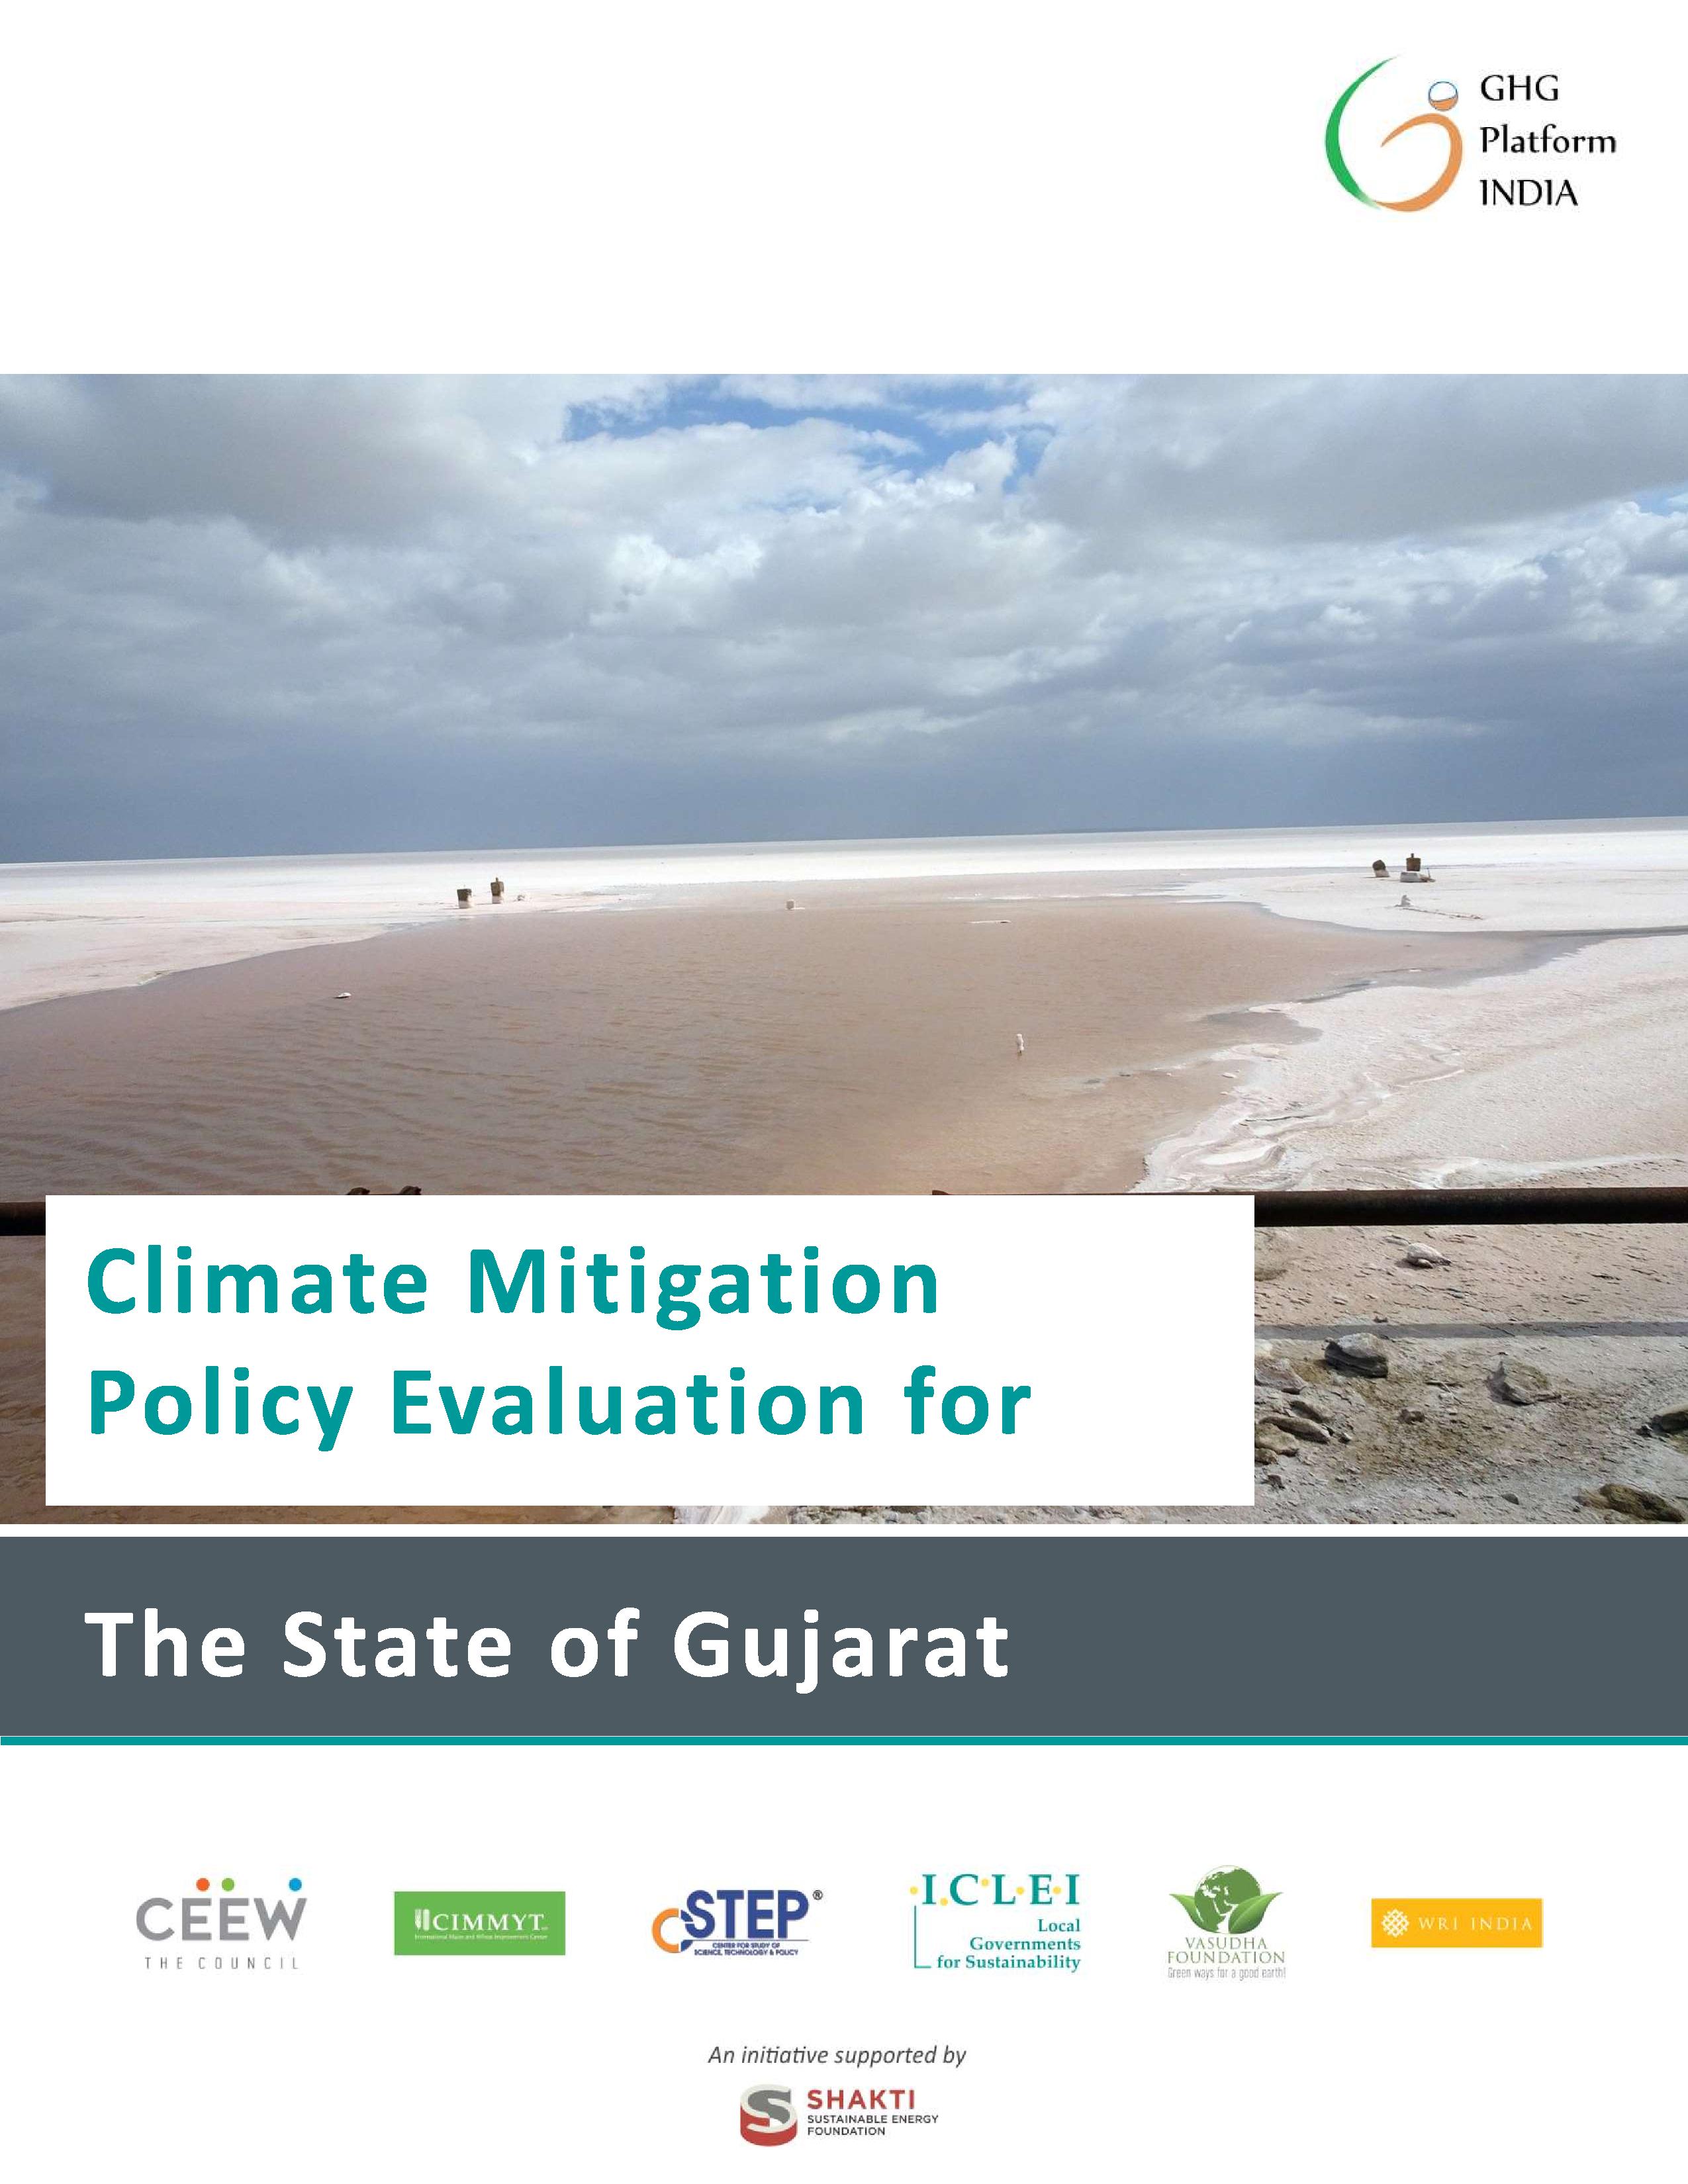 Climate Mitigation Policy Evaluation for the State of Gujarat - June 2020